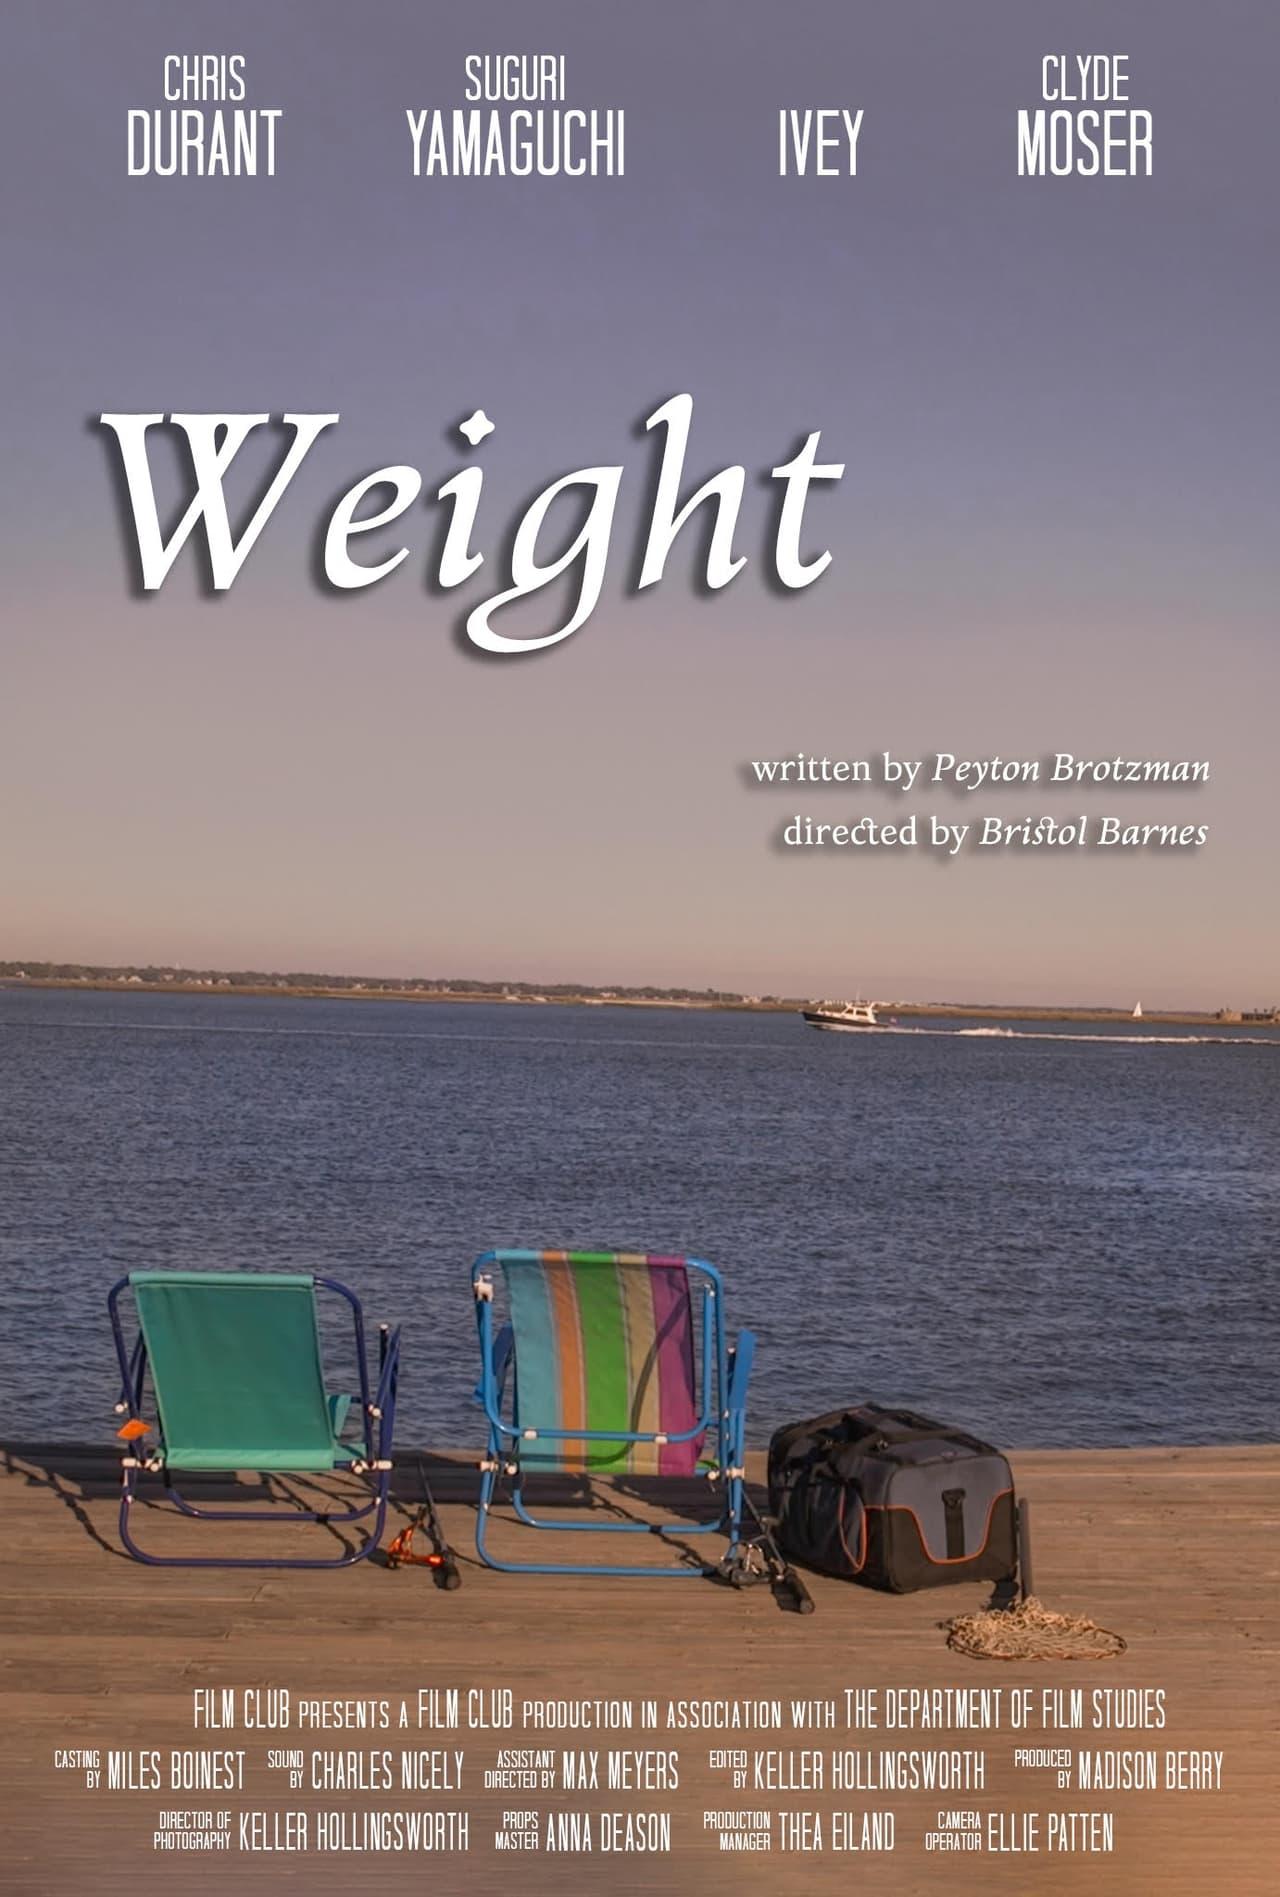 Weight poster